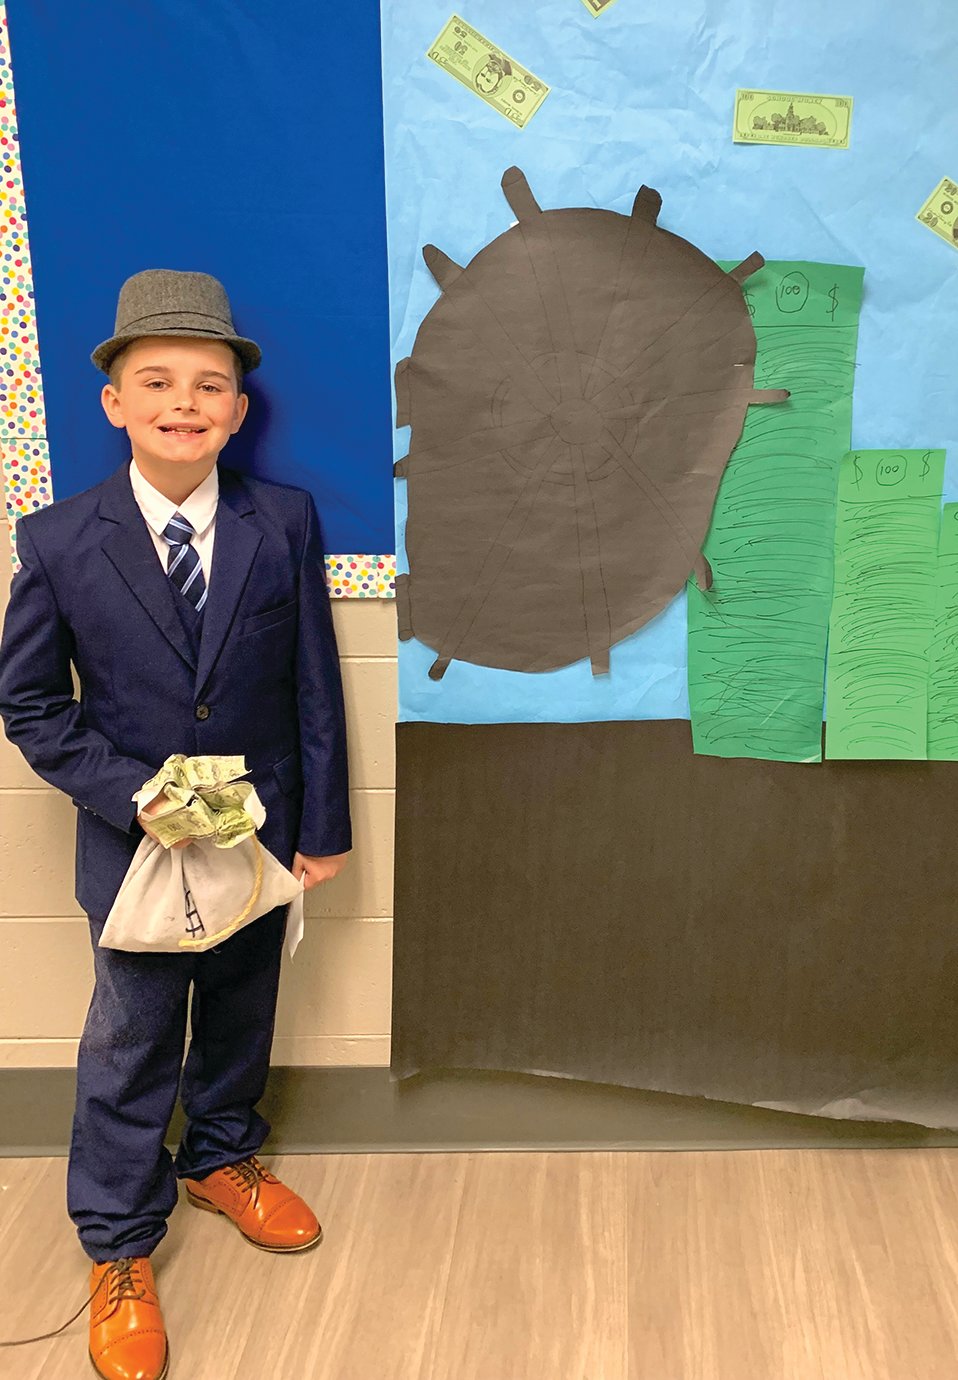 One of the most infamous Hoosiers of all time, bank robber and gangster John Dilinger, came to life in fourth grader Jaxson Bretney at Pleasant Hill. The public